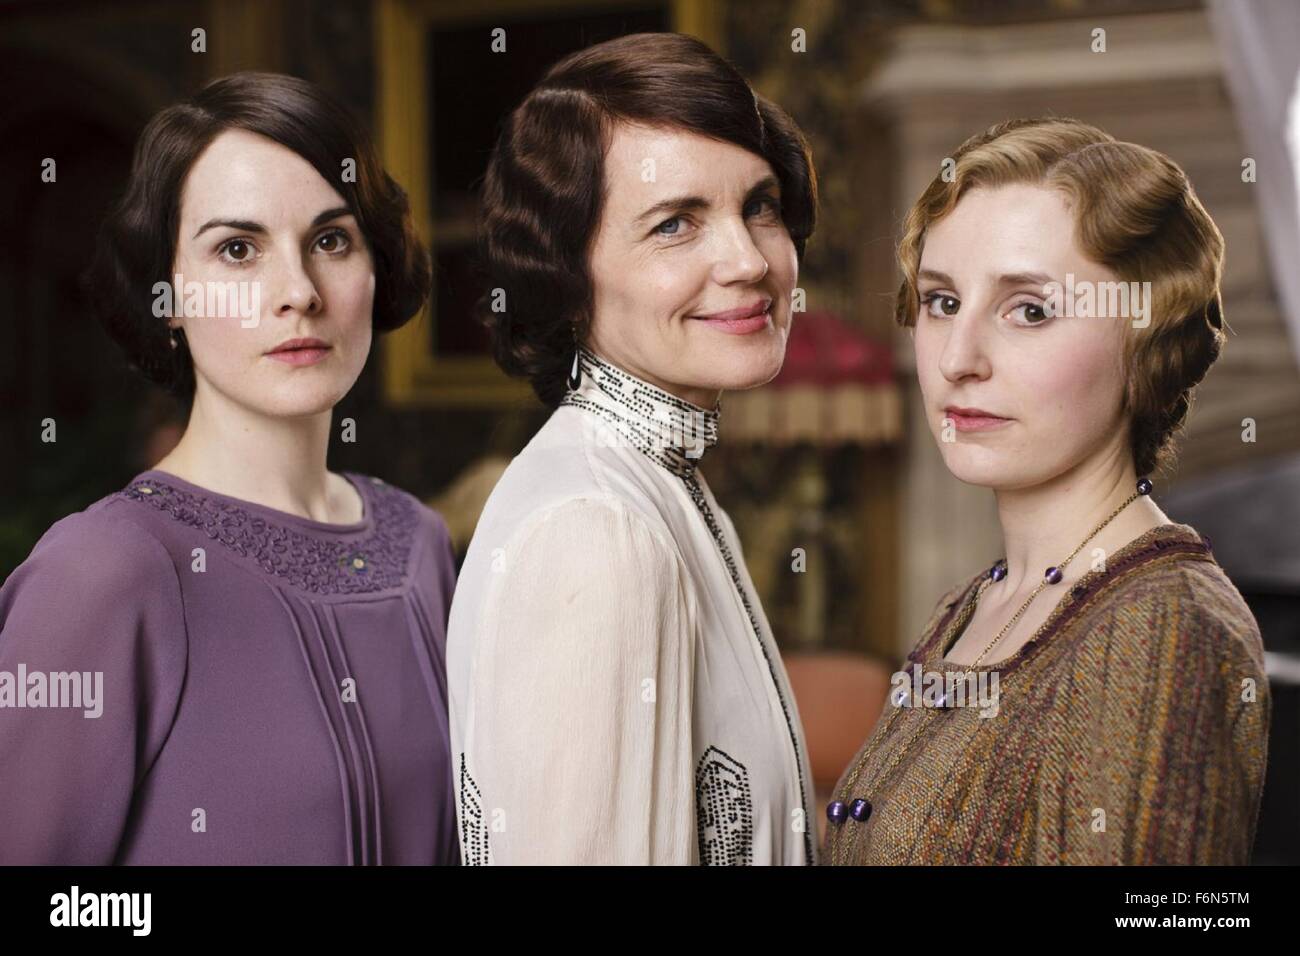 Mar 26, 2015 - London, England, United Kingdom - The next season of ITV's period drama Downton Abbey will be its last, its makers have announced. Created by Julian Fellowes, the show follows an aristocratic family's fortunes from 1912 to the mid-1920s. H. Bonneville and Elizabeth Mcgovern have played the Earl and Countess of Grantham since the show began in 2010. The drama has won a string of awards since its inception, including two Baftas, three Golden Globes and 11 Primetime Emmys. (Credit Image: c Carnival Film and Television/Entertainment Pictures) Stock Photo